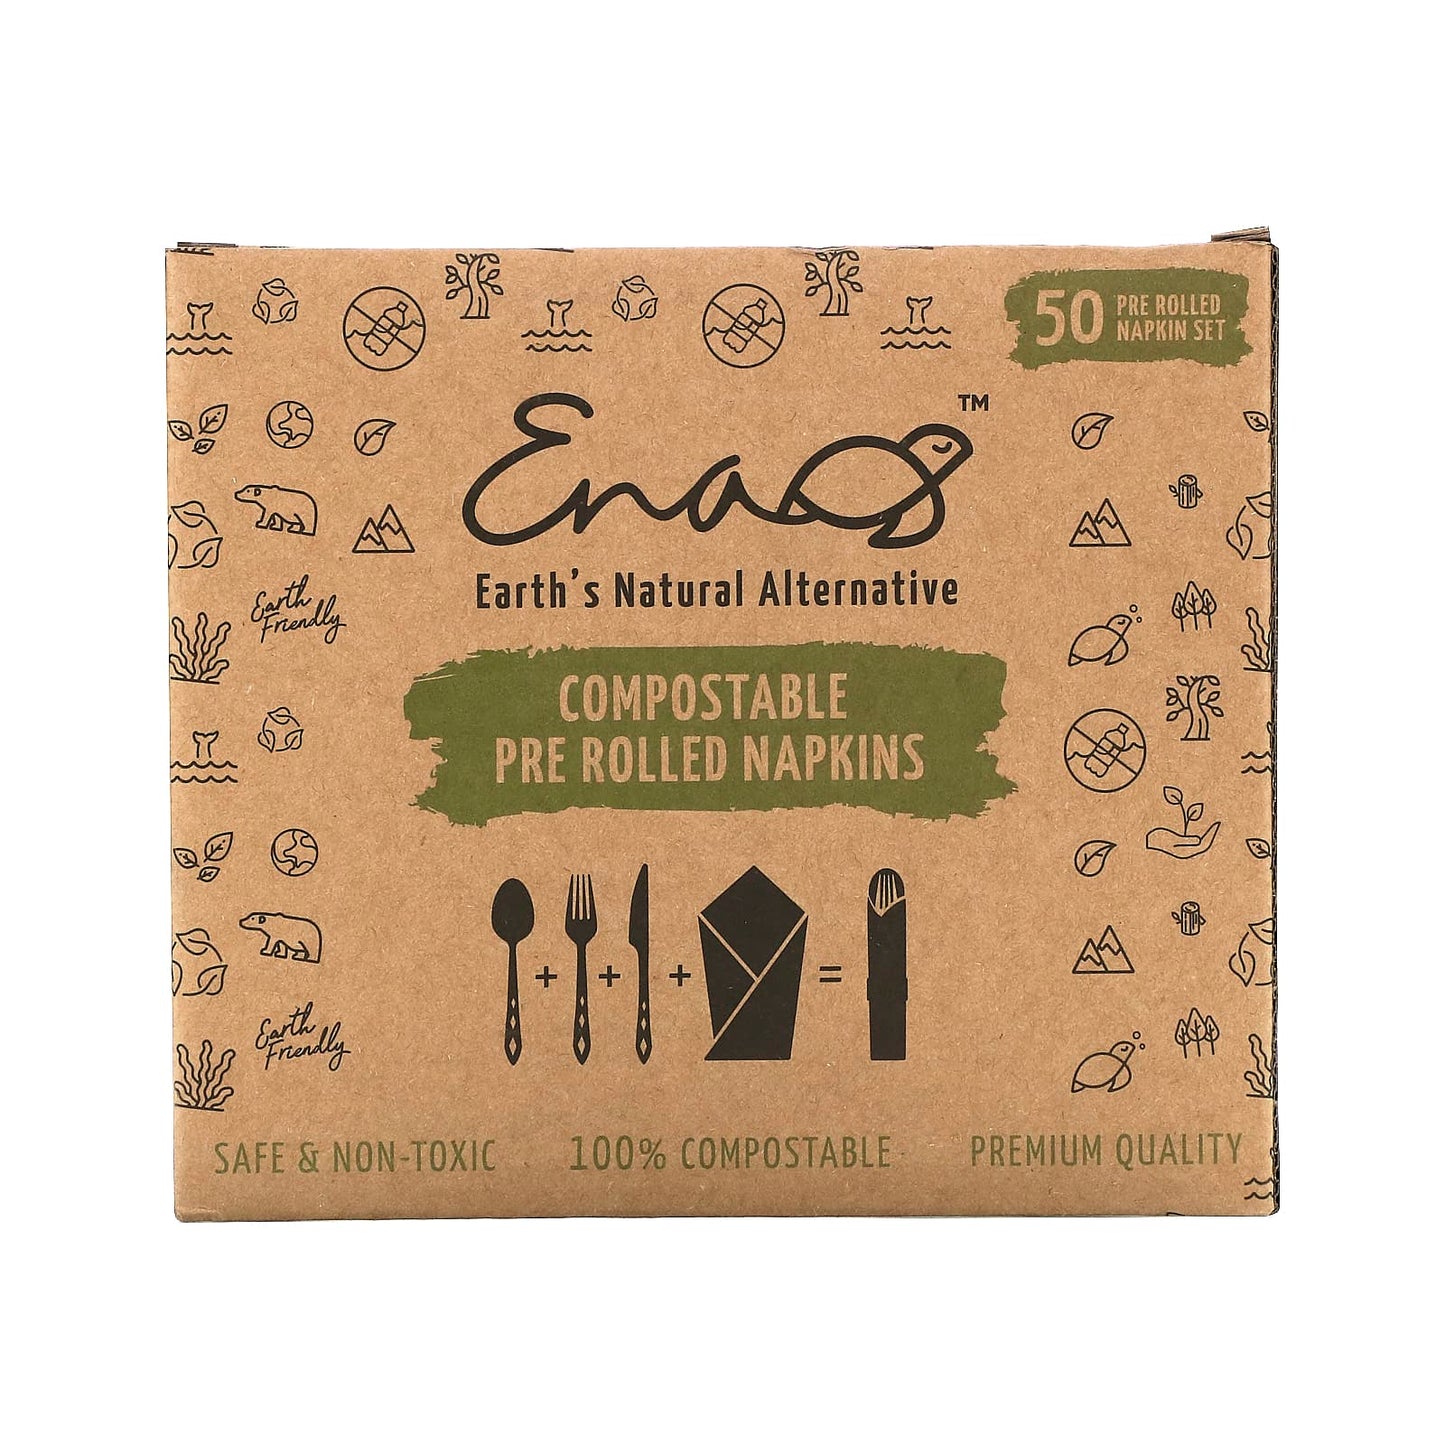 Earth's Natural Alternative-Compostable Pre Rolled Napkins with Knife-Fork and Spoon-50 Rolls